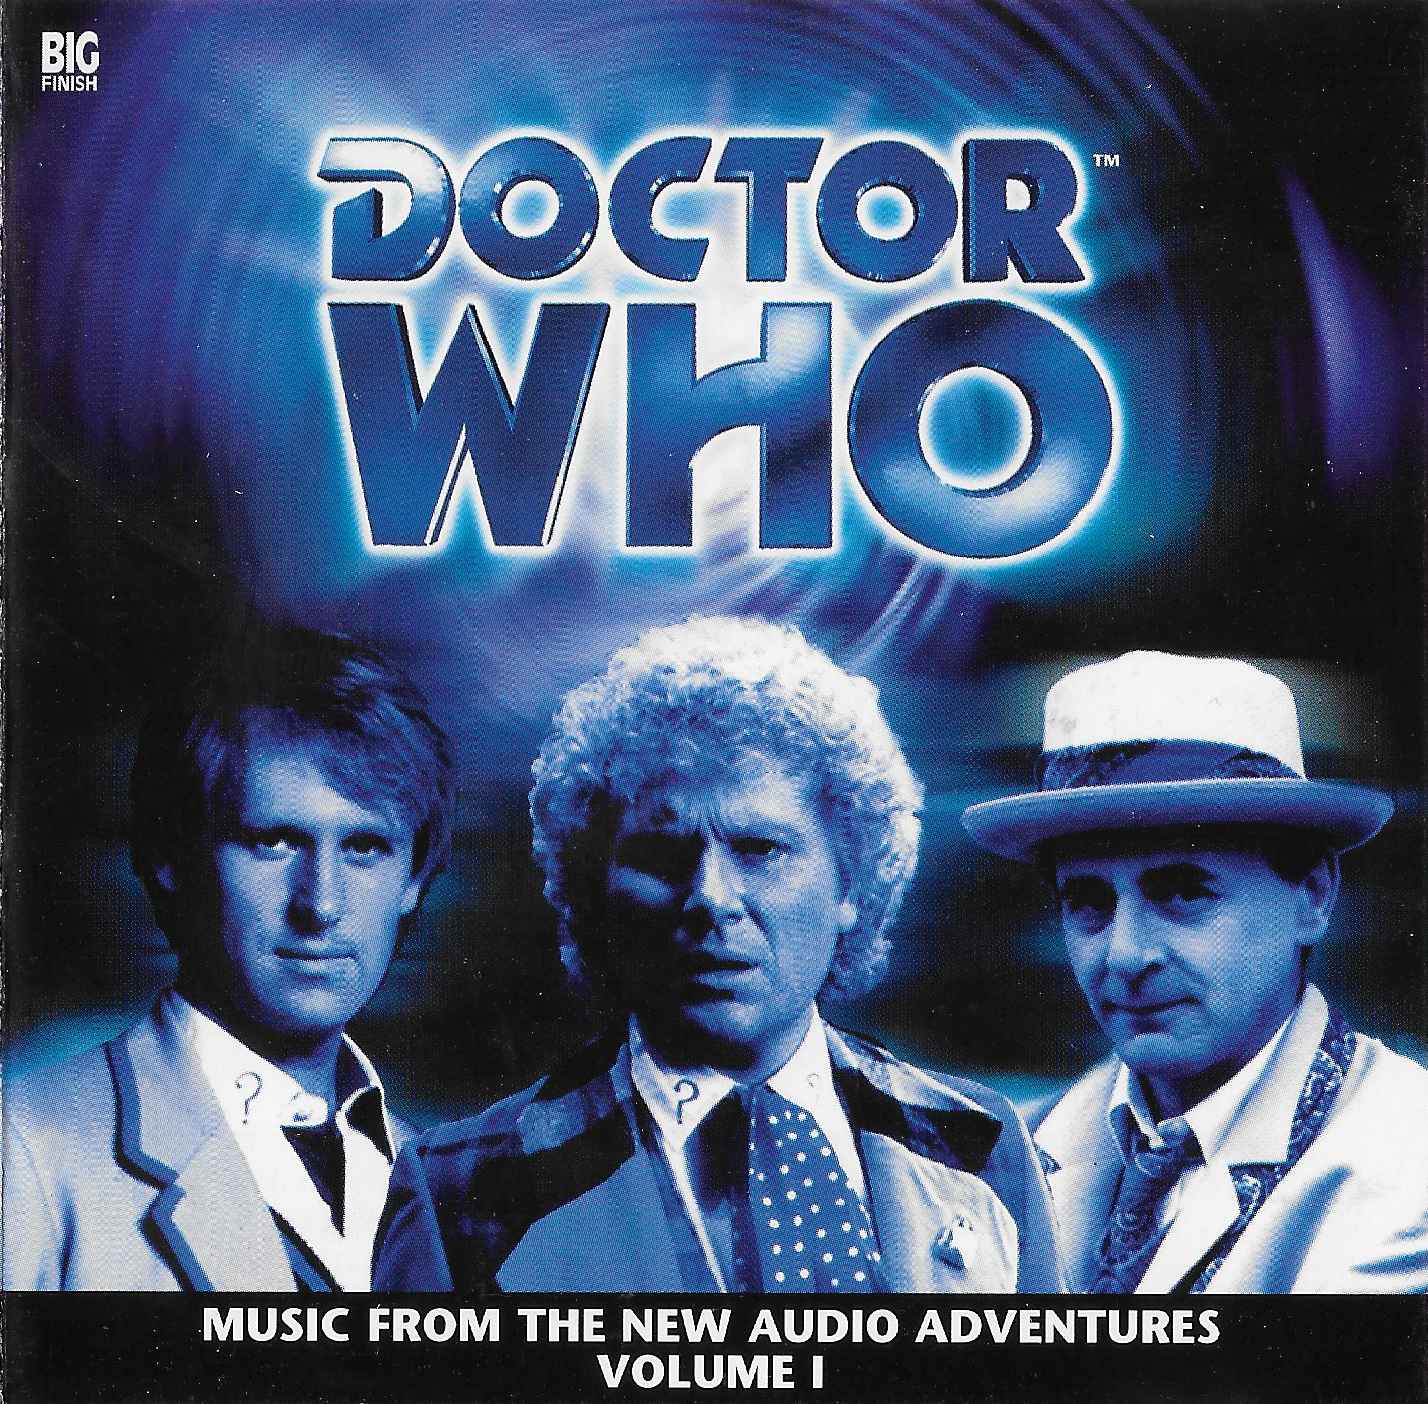 Picture of BFPCDMUSIC 1 Doctor Who - Music from the new adventures - Volume 1 by artist Alistair Lock from the BBC records and Tapes library